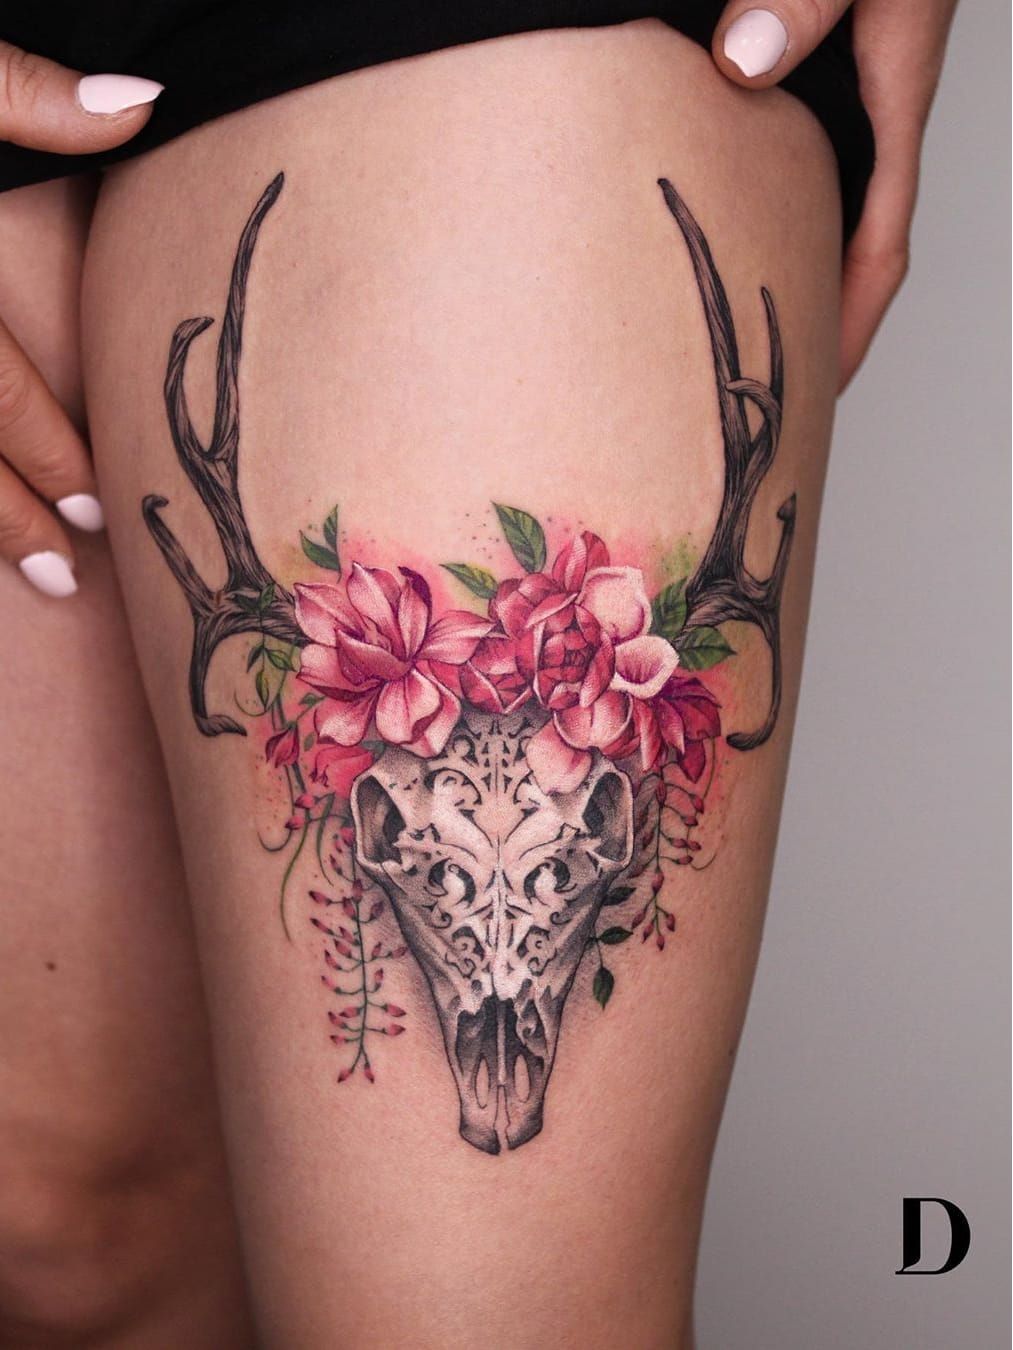 Cow skull and flowers tattoo  Aaron Casas  Cow skull tattoos Bull tattoos  Bull skull tattoos